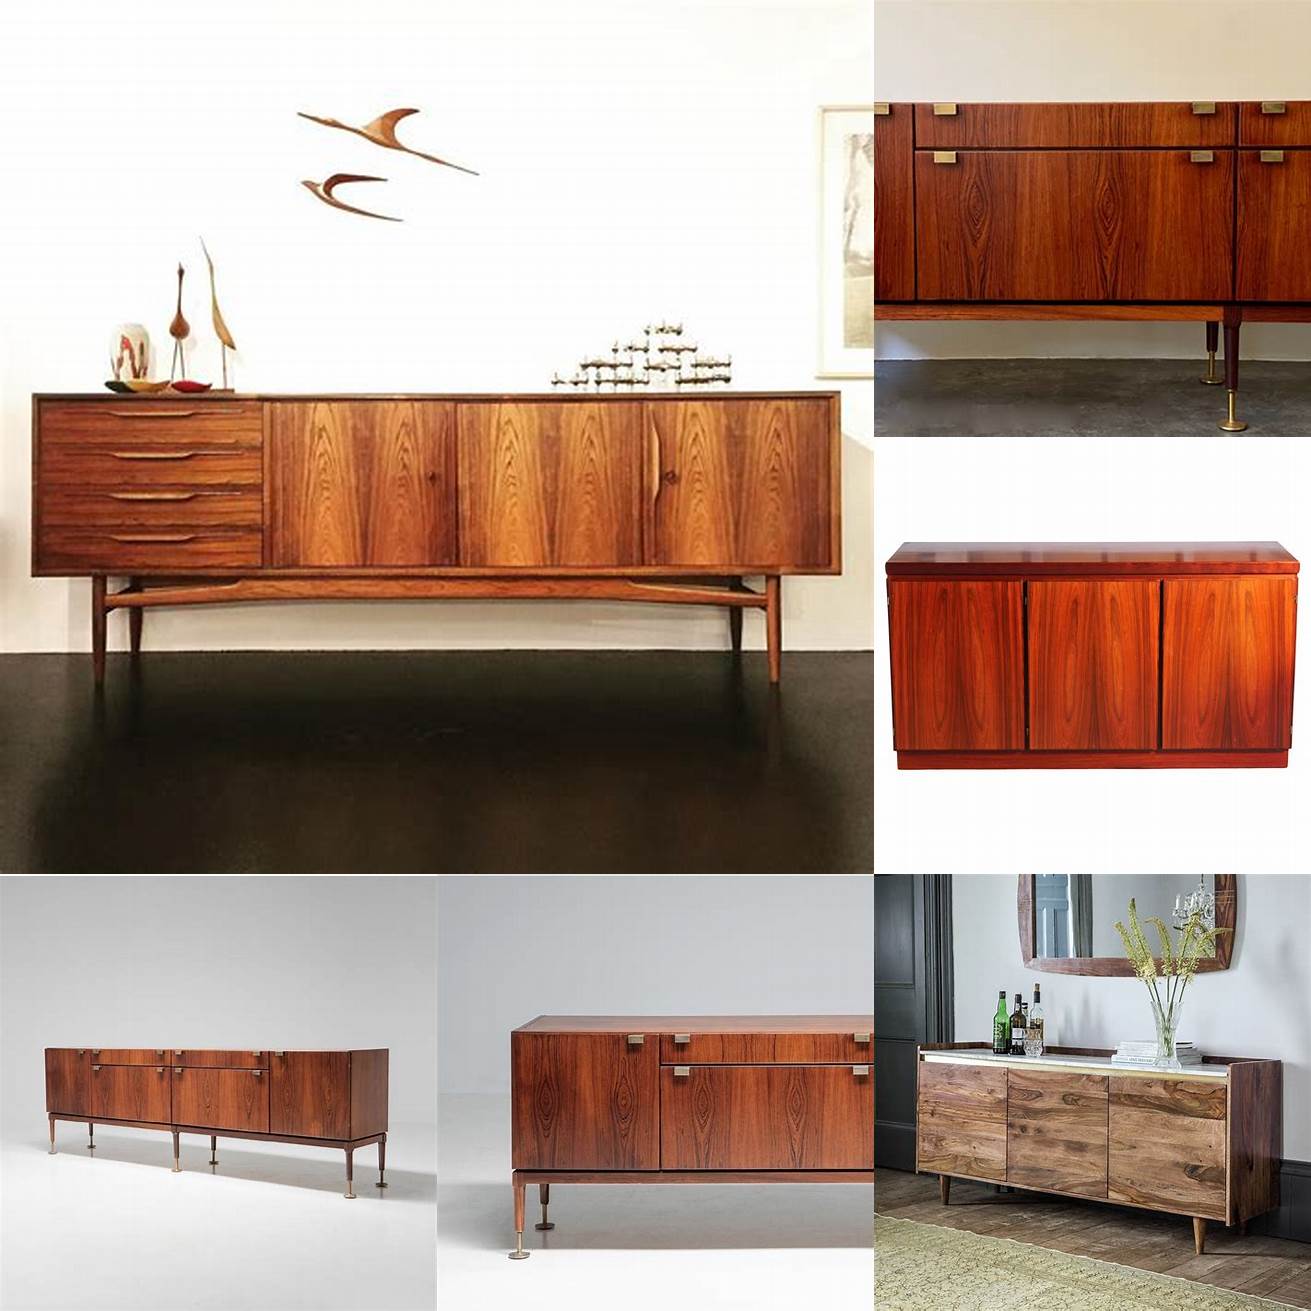 Rosewood sideboard with organic shapes